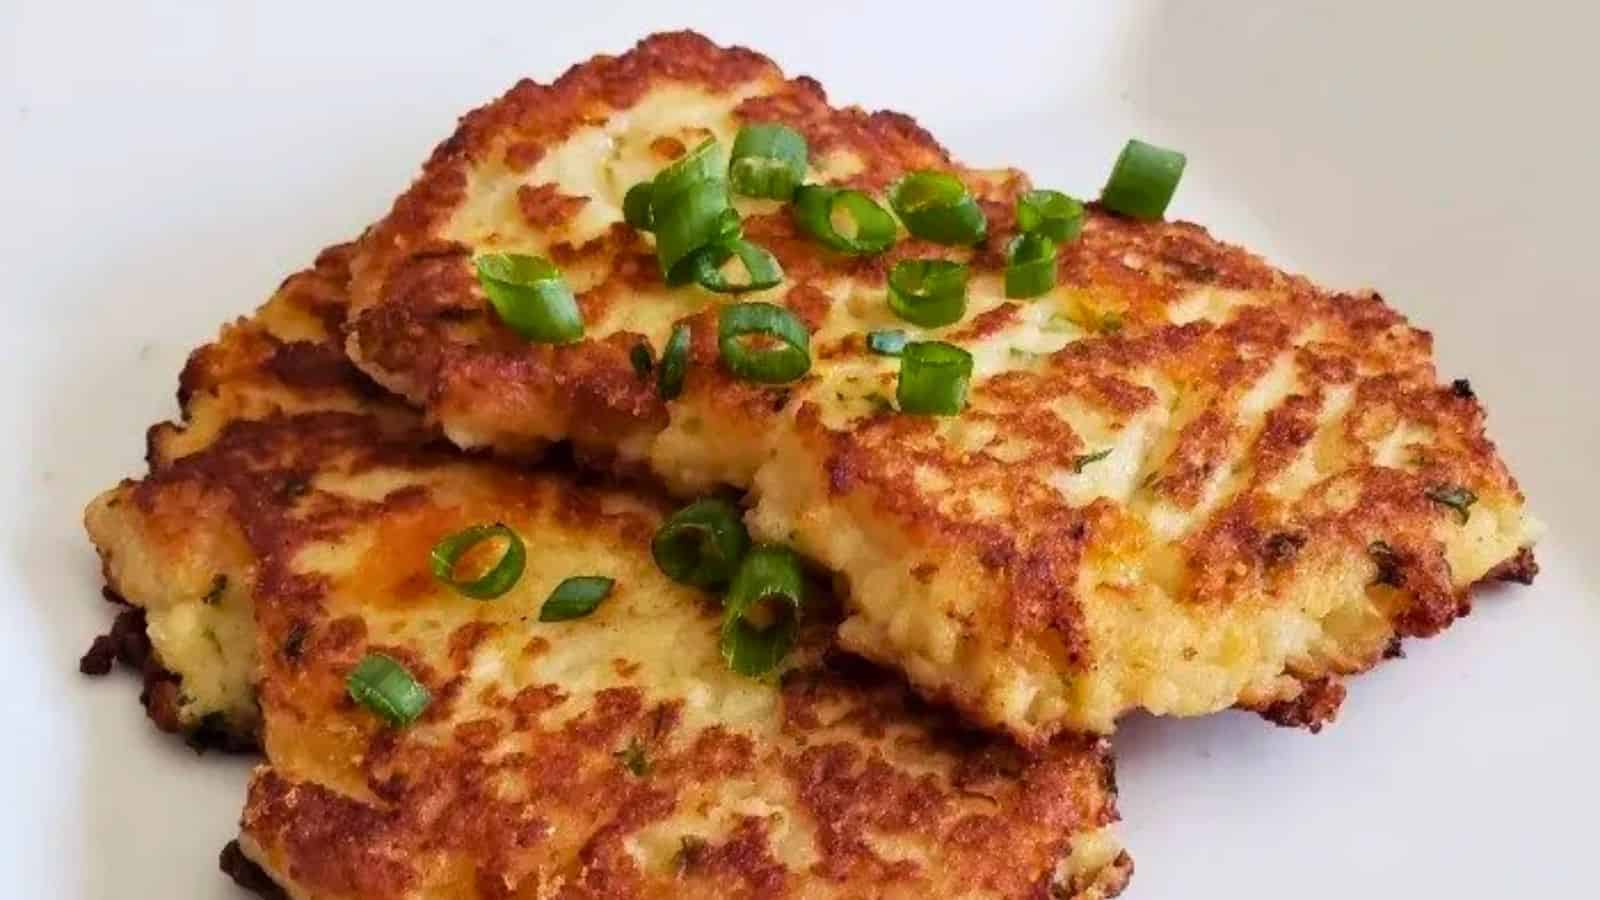 Image shows A plate of loaded mashed potato pancakes with green onions on it.